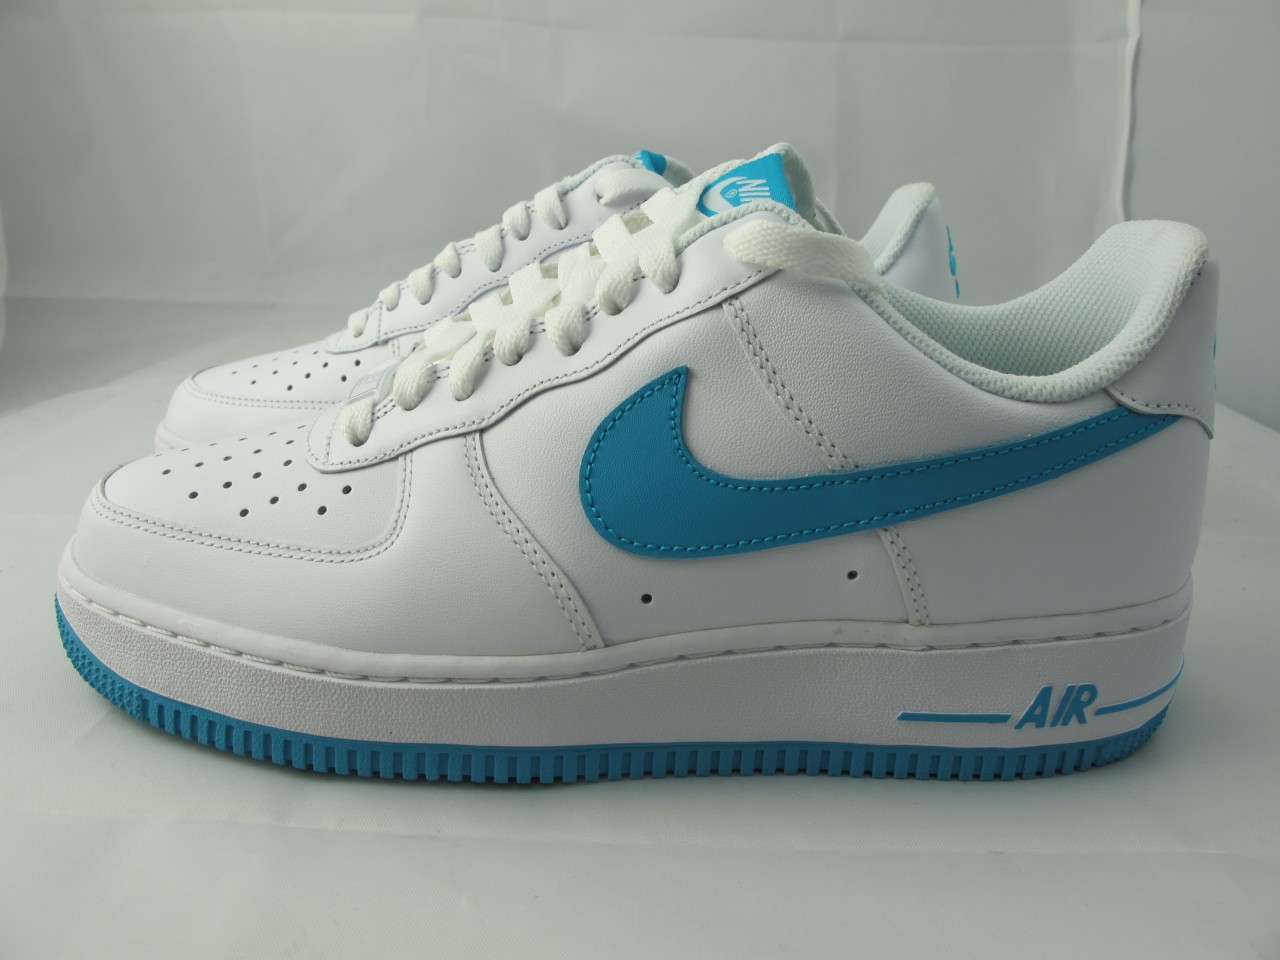 turquoise air force ones57% OFF Nike 